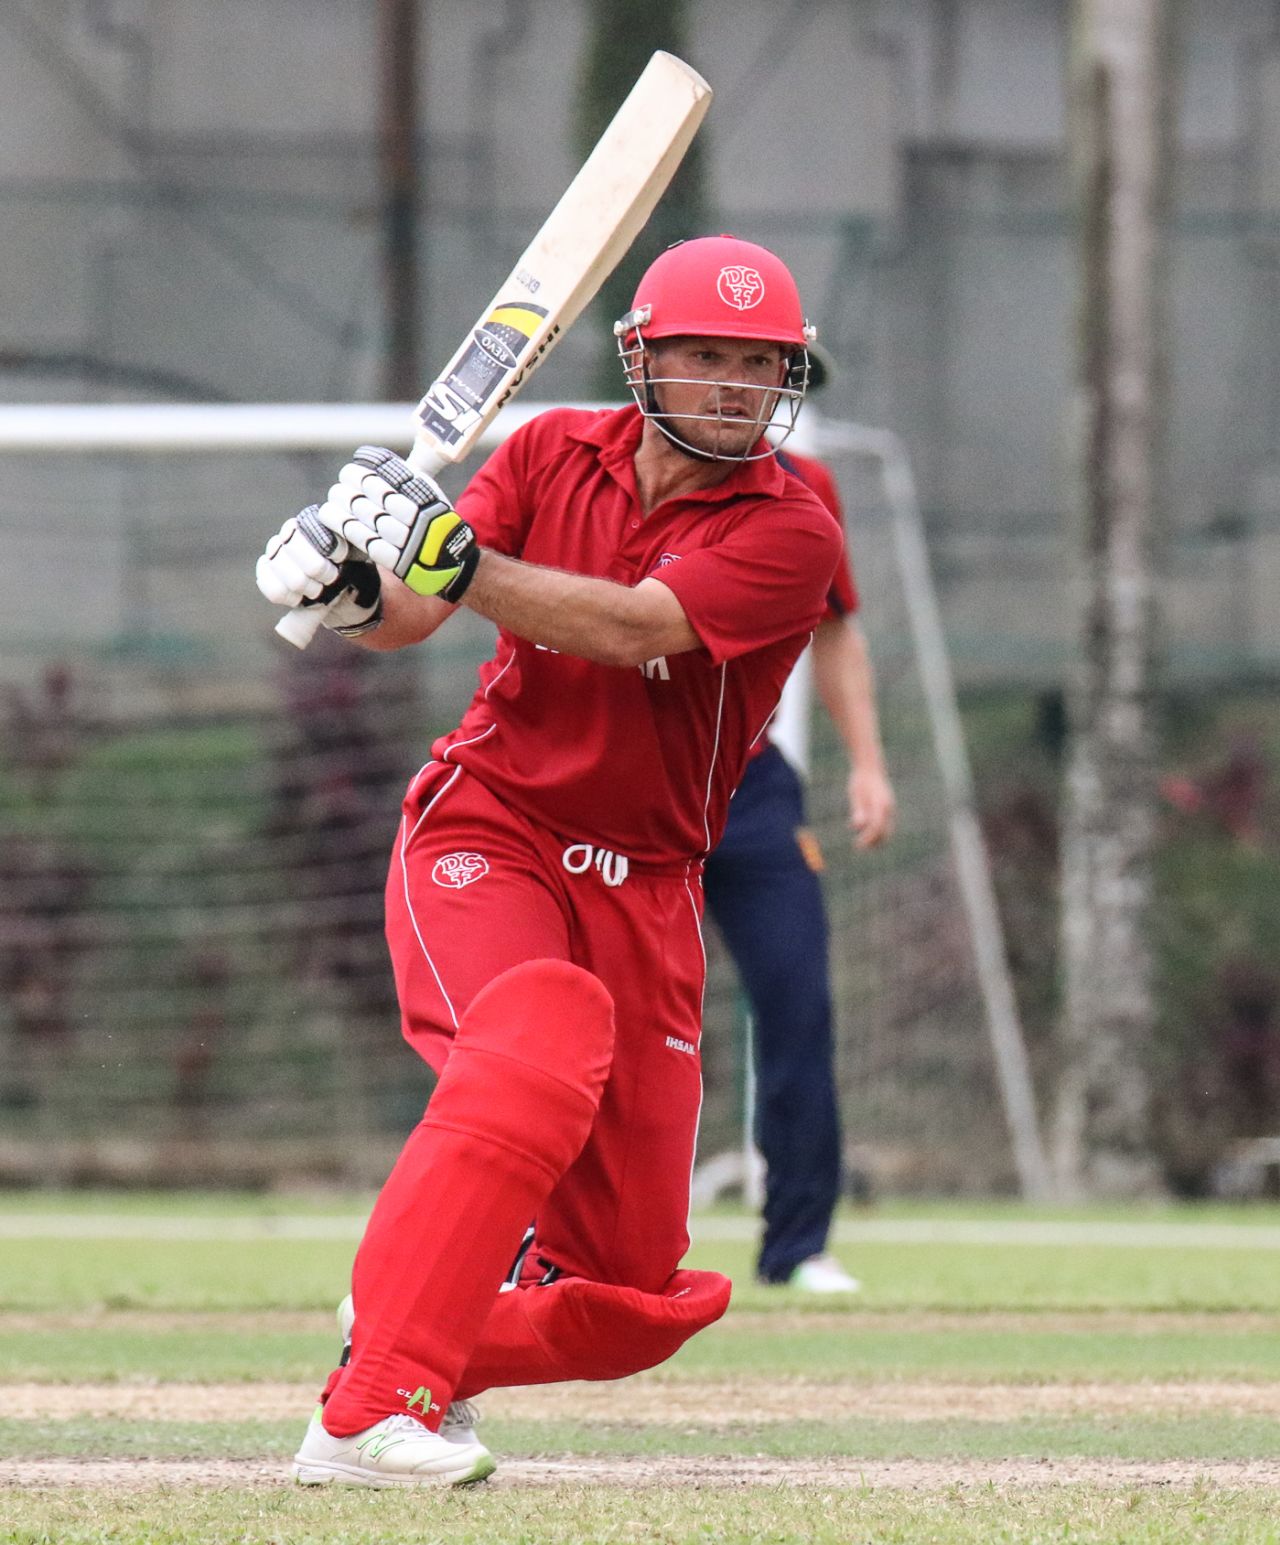 Freddie Klokker pulls behind square for a boundary on his way to top-scoring for Denmark, Denmark v Jersey, ICC World Cricket League Division Four, Kuala Lumpur, April 30, 2018